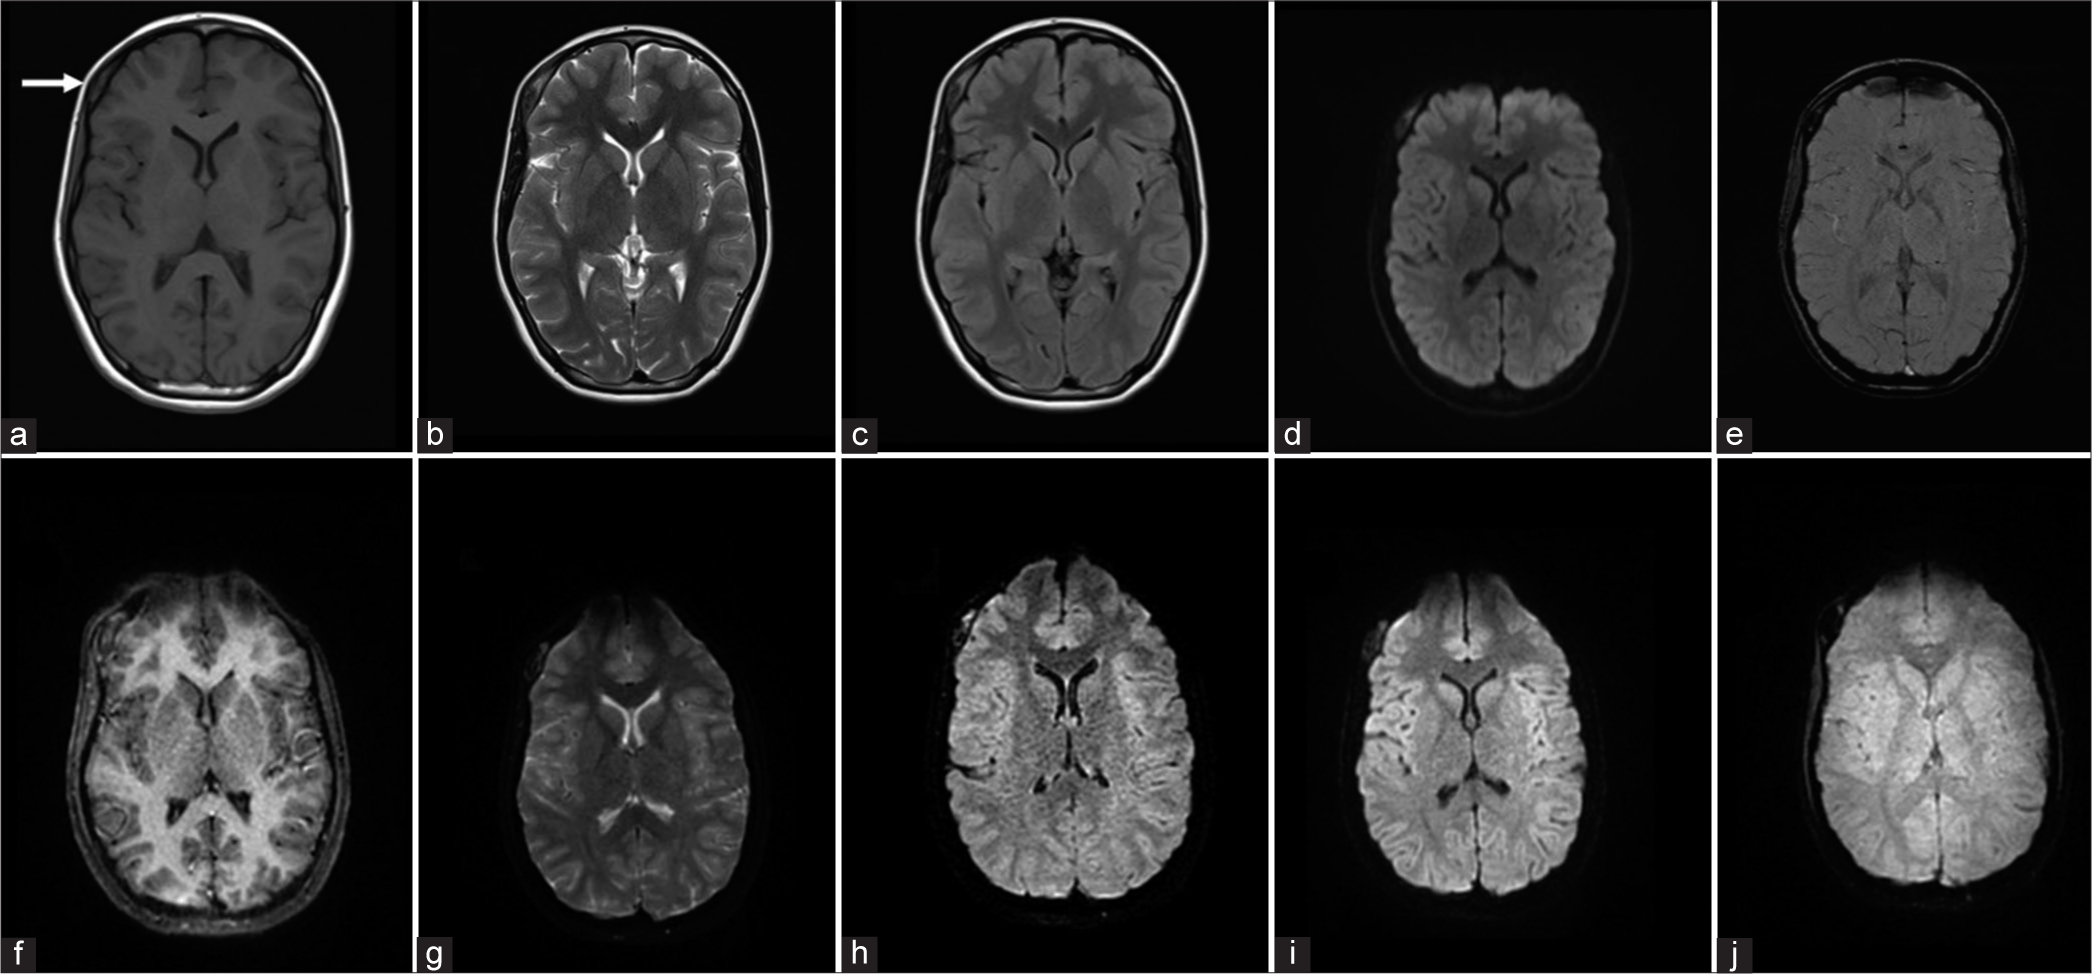 A 14-year-old female patient with a right frontal calvarial lesion presenting with a swelling in the forehead on the right side. Conventional MR [(a) T1W, (b) T2W, (c) FLAIR, (d) DWI, and (e) SWAN] and EPIMix axial images [(f) T1W, (g) T2W, (h) FLAIR, (i) and (j) T2*] show the right frontal calvarial lesion (white arrow in a). Lesions of the skull base, calvarium, and orbit are more difficult to visualize on EPIMix images. T1W: T1 weighted, T2W: T2 weighted, FLAIR: Fluid-attenuated inversion recovery, DWI: Diffusion-weighted imaging, EPIMix: Echo-planar image mix, SWAN: Susceptibility-weighted angiography, MR: Magnetic resonance.